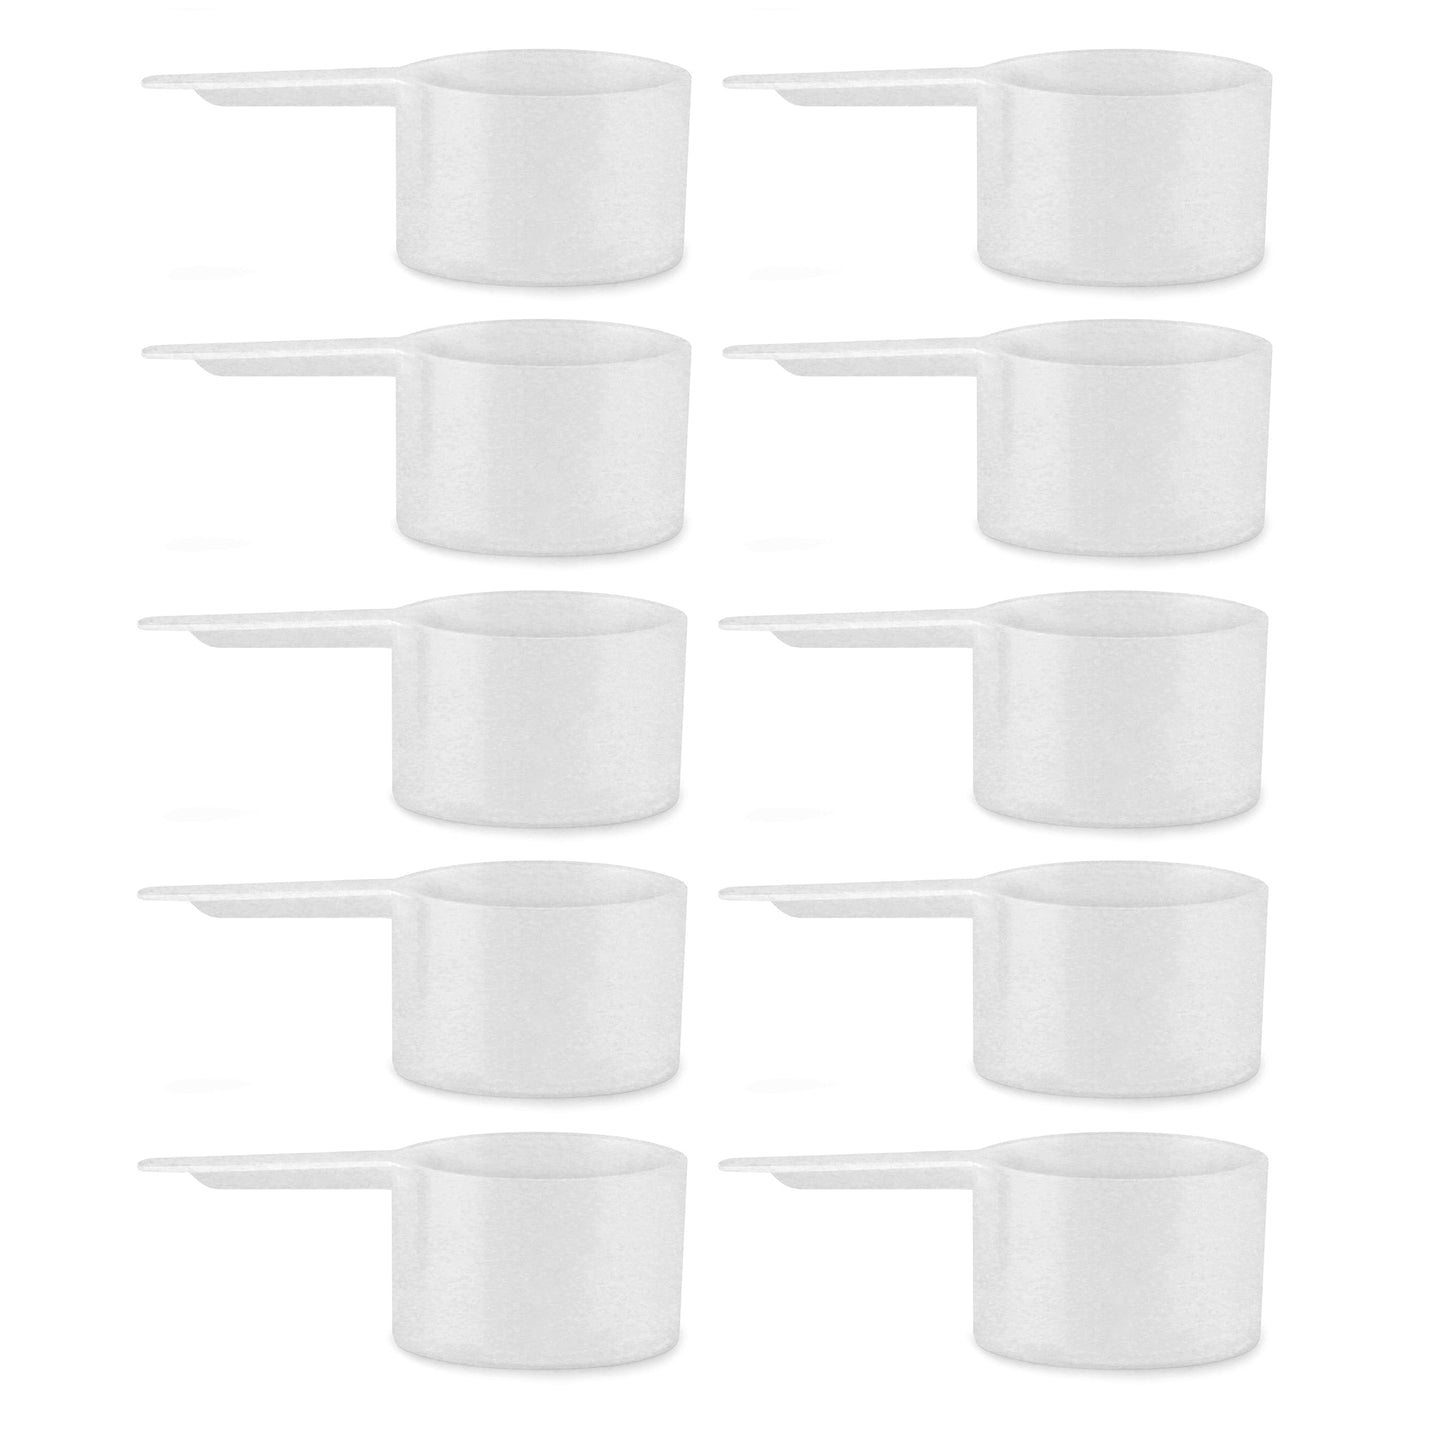 43cc / 3-Tablespoon Scoops (Case of 1250) - SH_1472_CASE